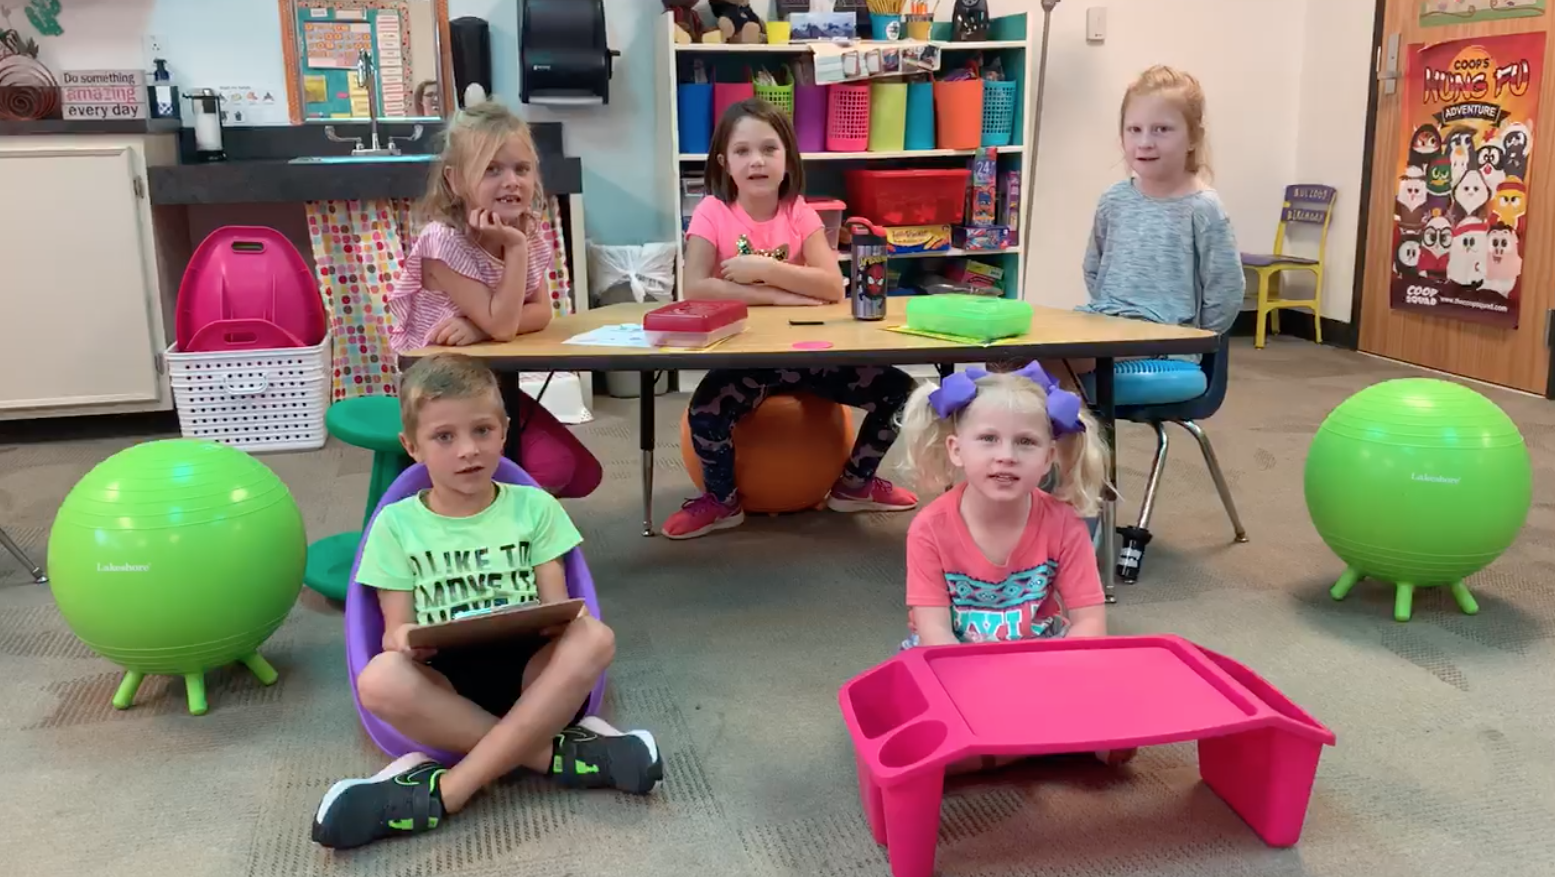 Wiggle Cushion  Alternative Seating for Classrooms